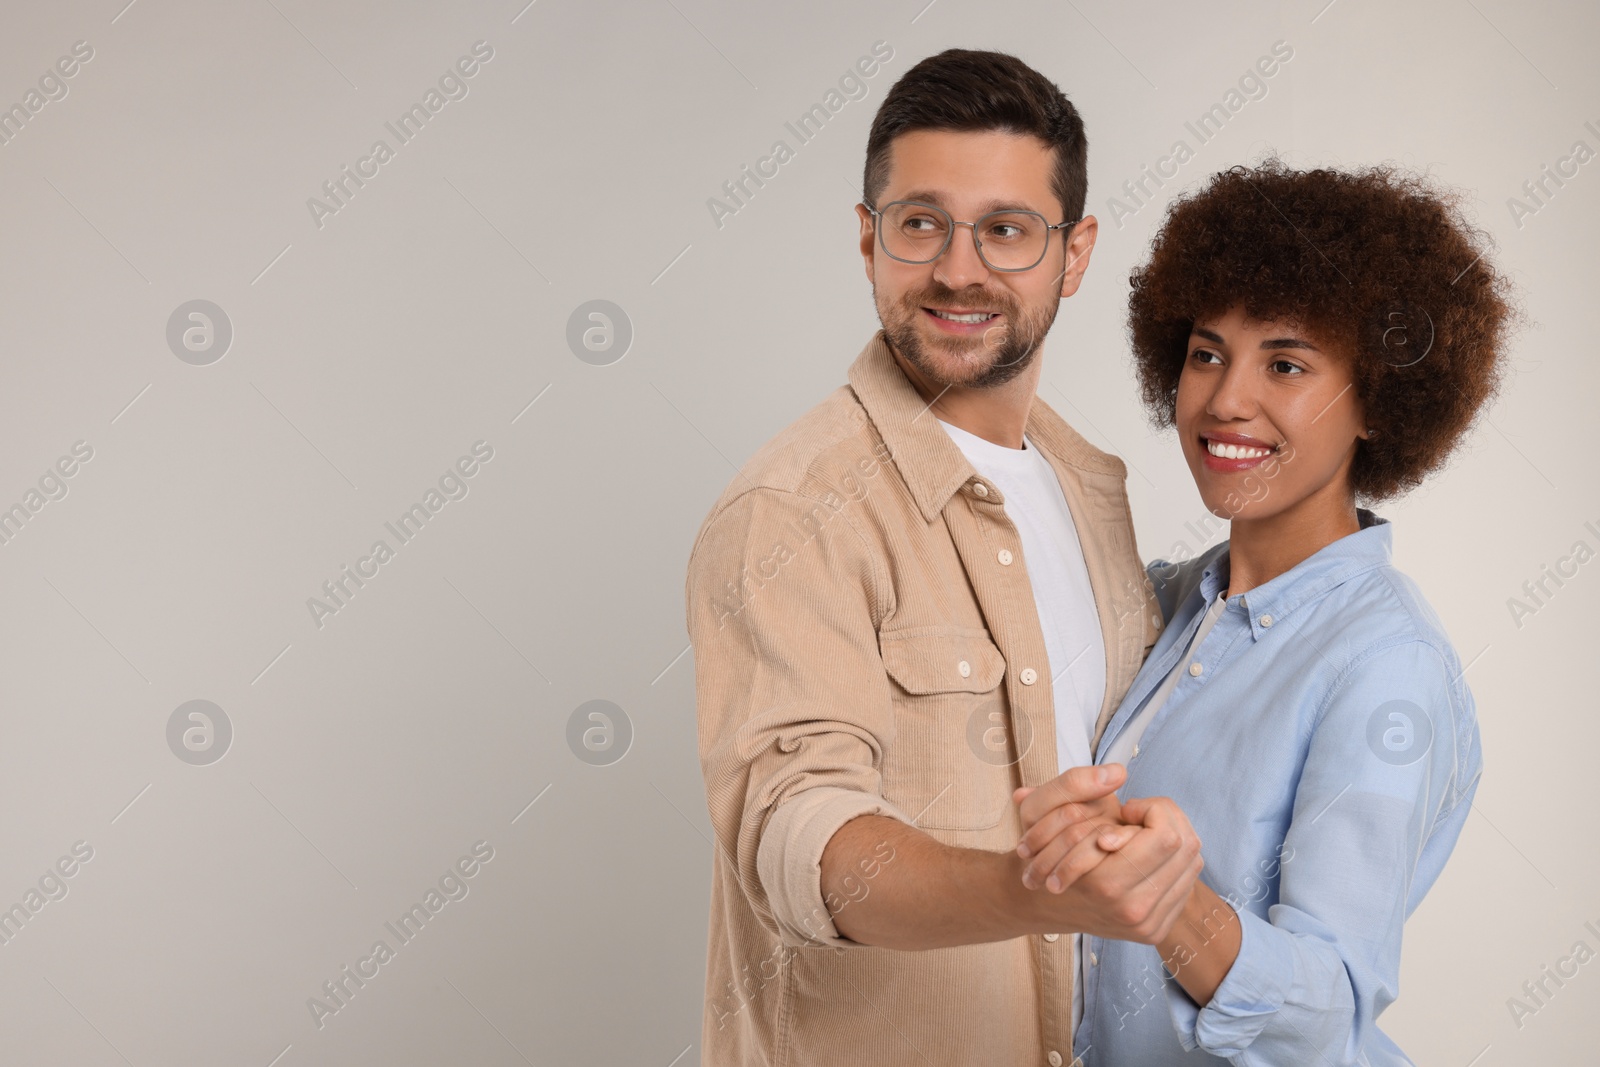 Photo of International dating. Happy couple dancing on light grey background, space for text